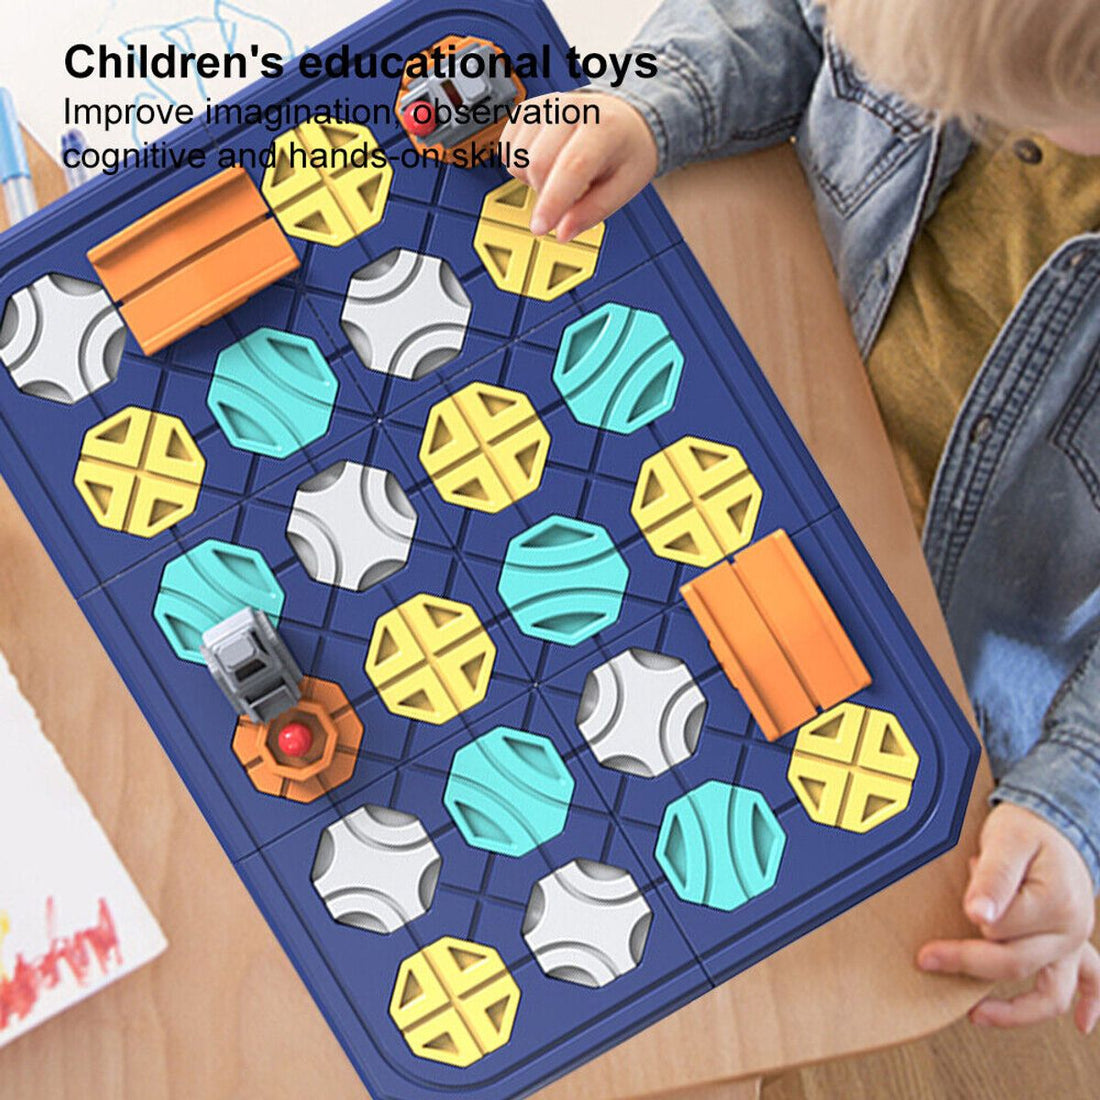 Puzzles That Promote Memory and Concentration Skills in Children